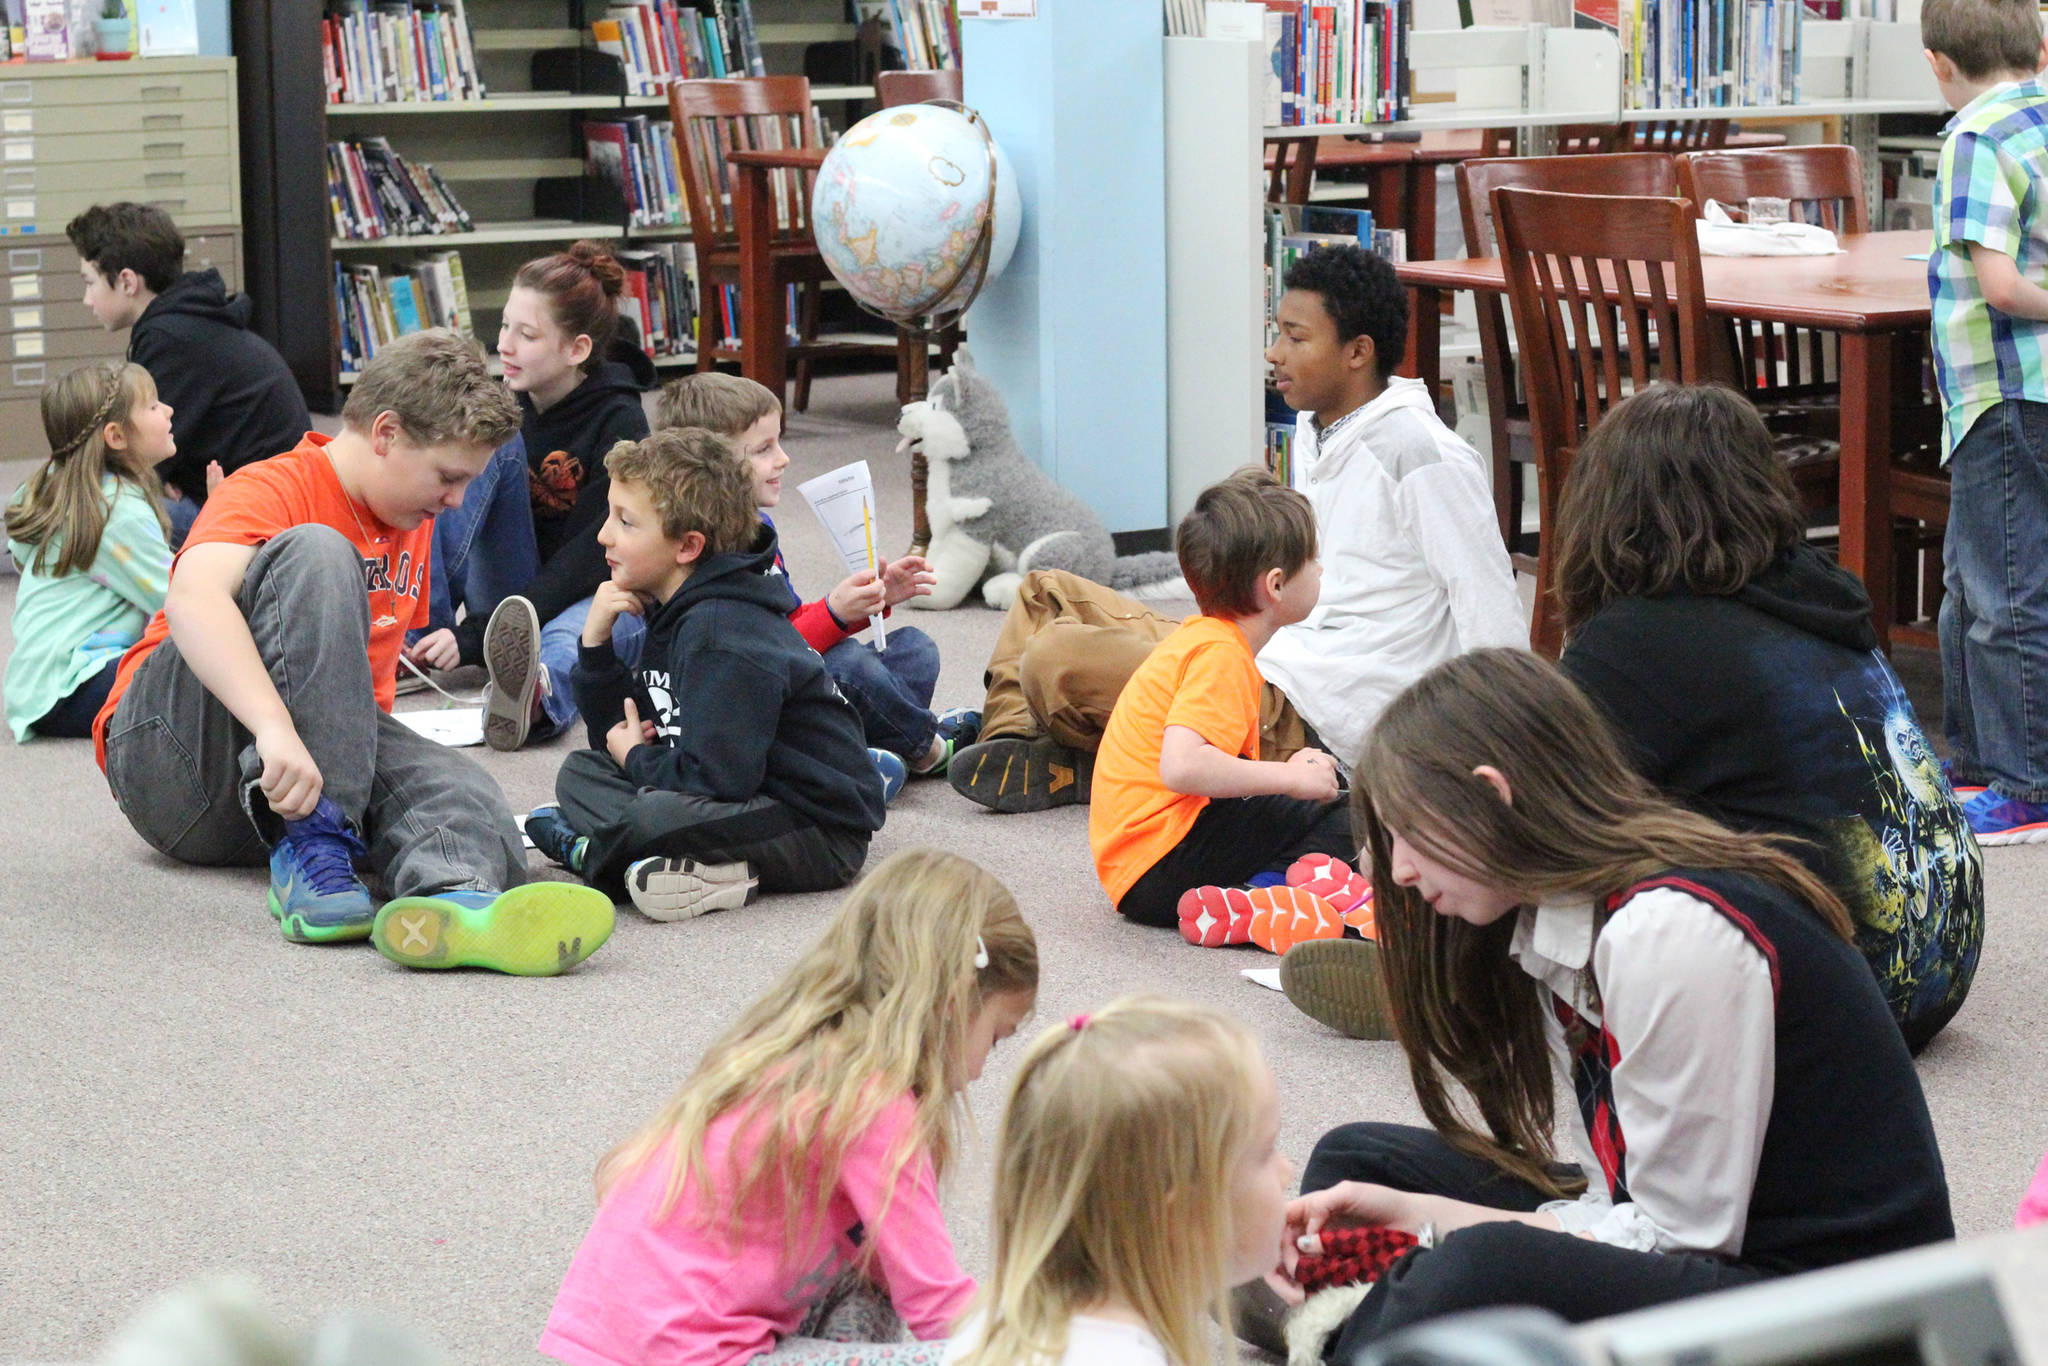 Eighth graders from Homer Middle School and first graders from Paul Banks Elementary debrief after working together on a project on sound during a lesson at the middle school Tuesday, Oct. 24, 2017 in Homer, Alaska. The lesson was organized through a mentorship program recently finalized between teachers at the two schools in which the younger students are paired with and learn from the older. (Photo by Megan Pacer/Homer News)